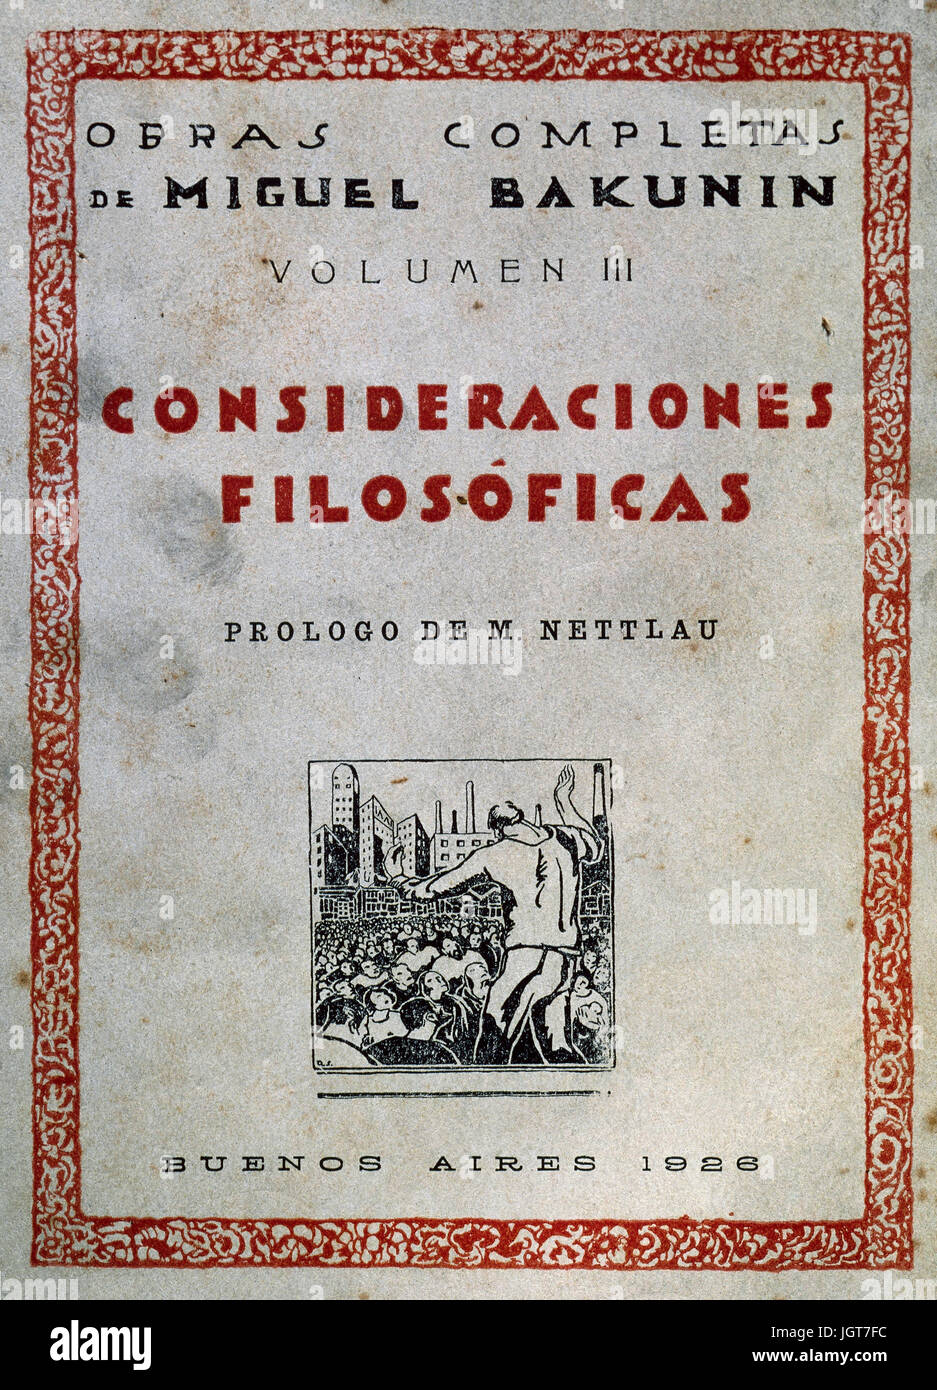 Mikhail Bakunin (1814-1876). Russian revolutionary anarchist. Philosophical considerations. Volume III. Cover page. Edited in Spanish, 1926. Buenos Aires. Translated by D.A. Santillan. Stock Photo